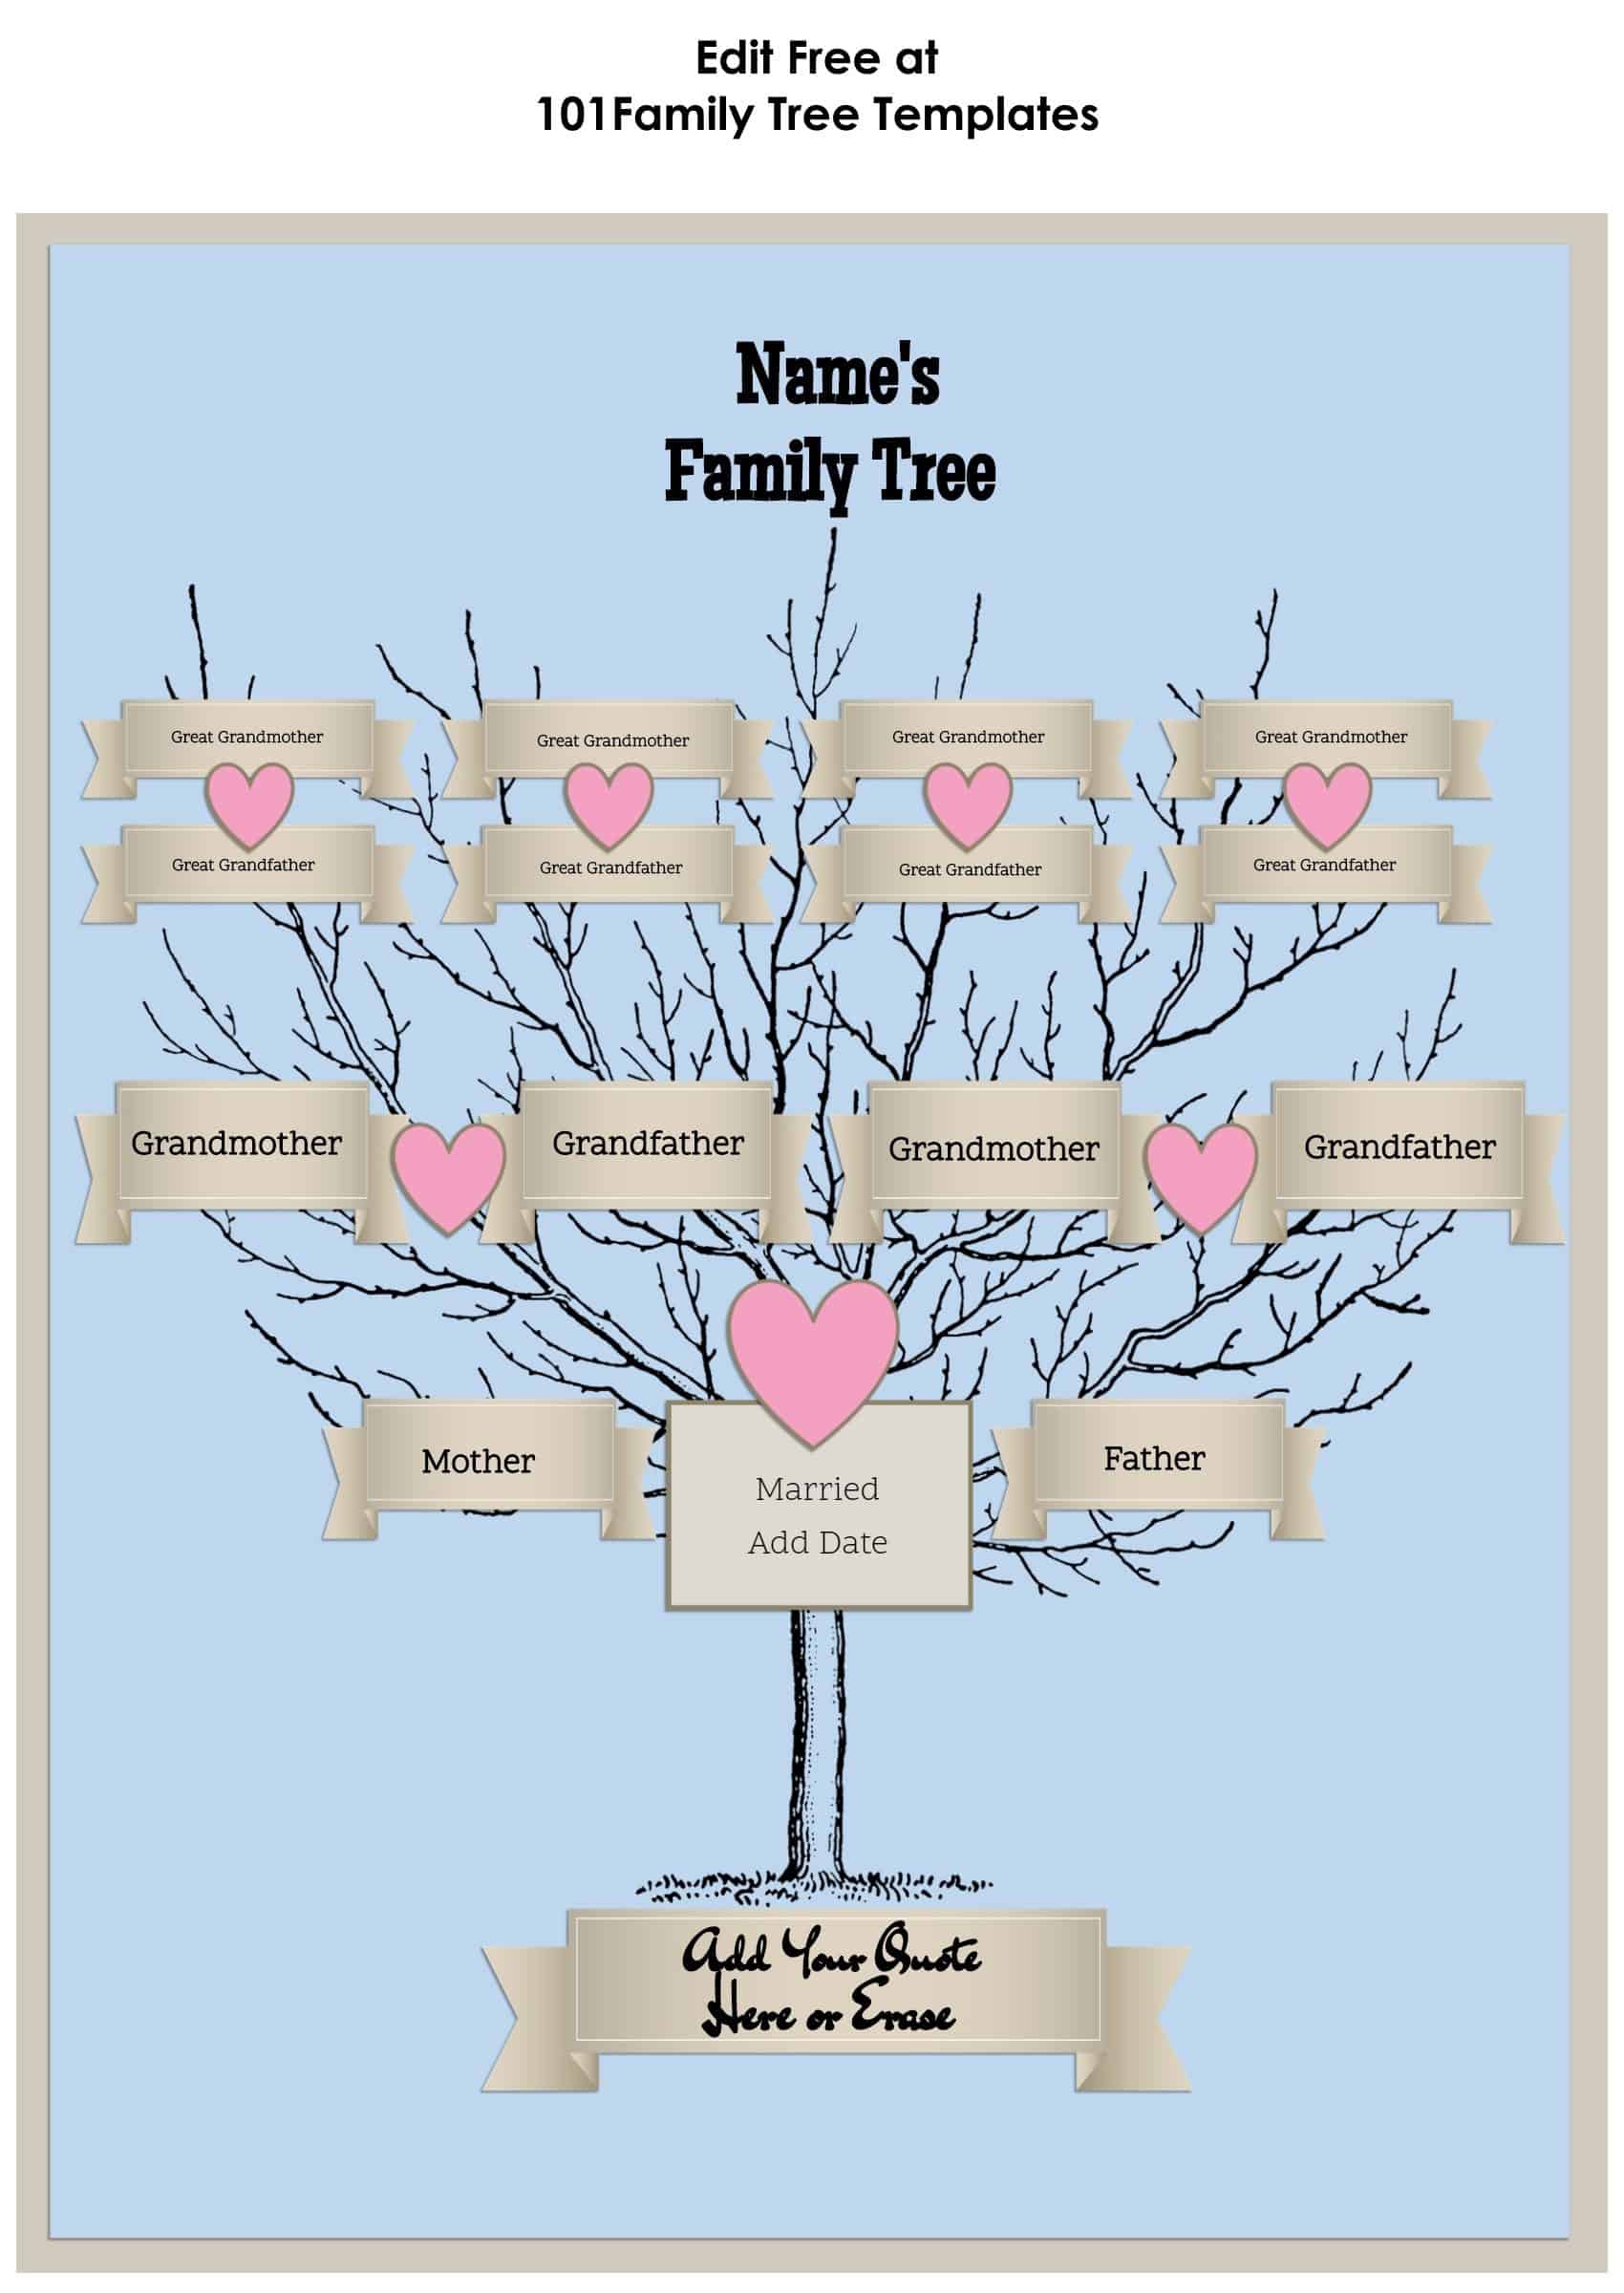 3-generation-family-tree-generator-all-templates-are-free-to-customize